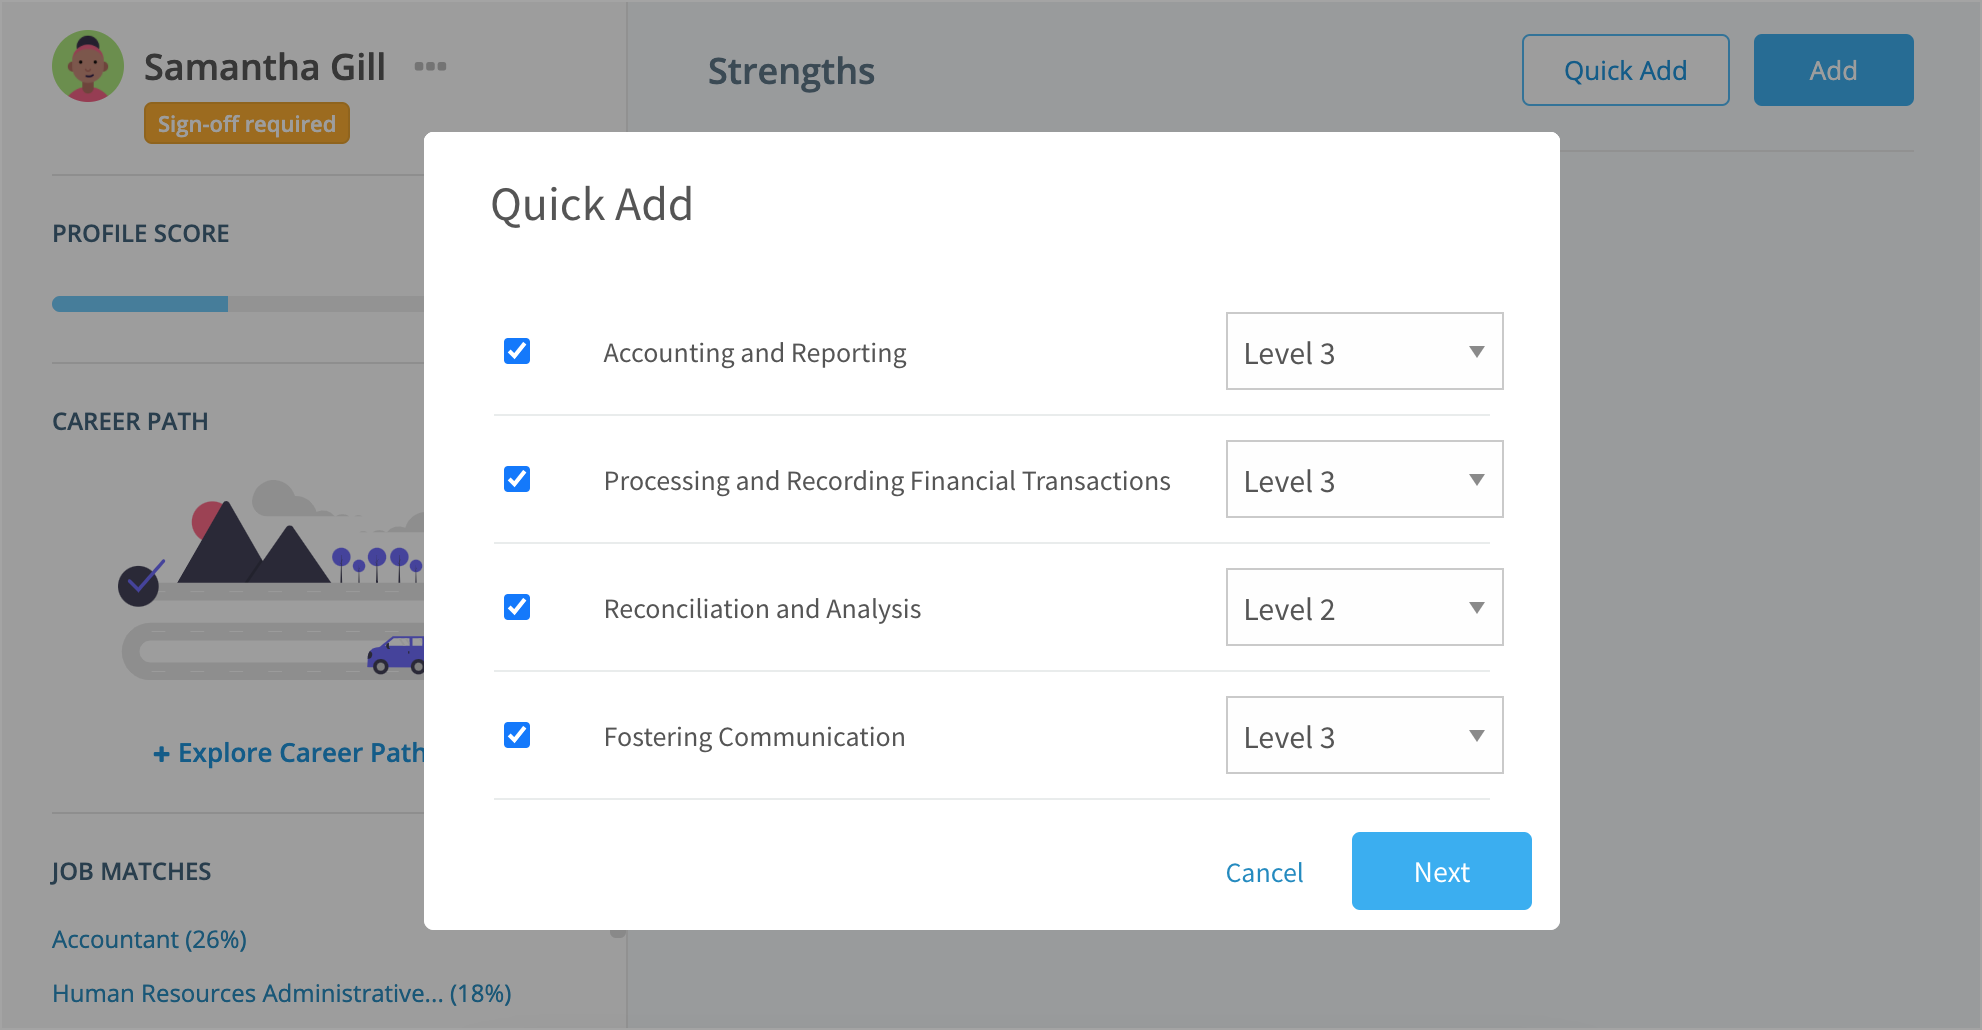 Adding strengths to your profile based on your current role